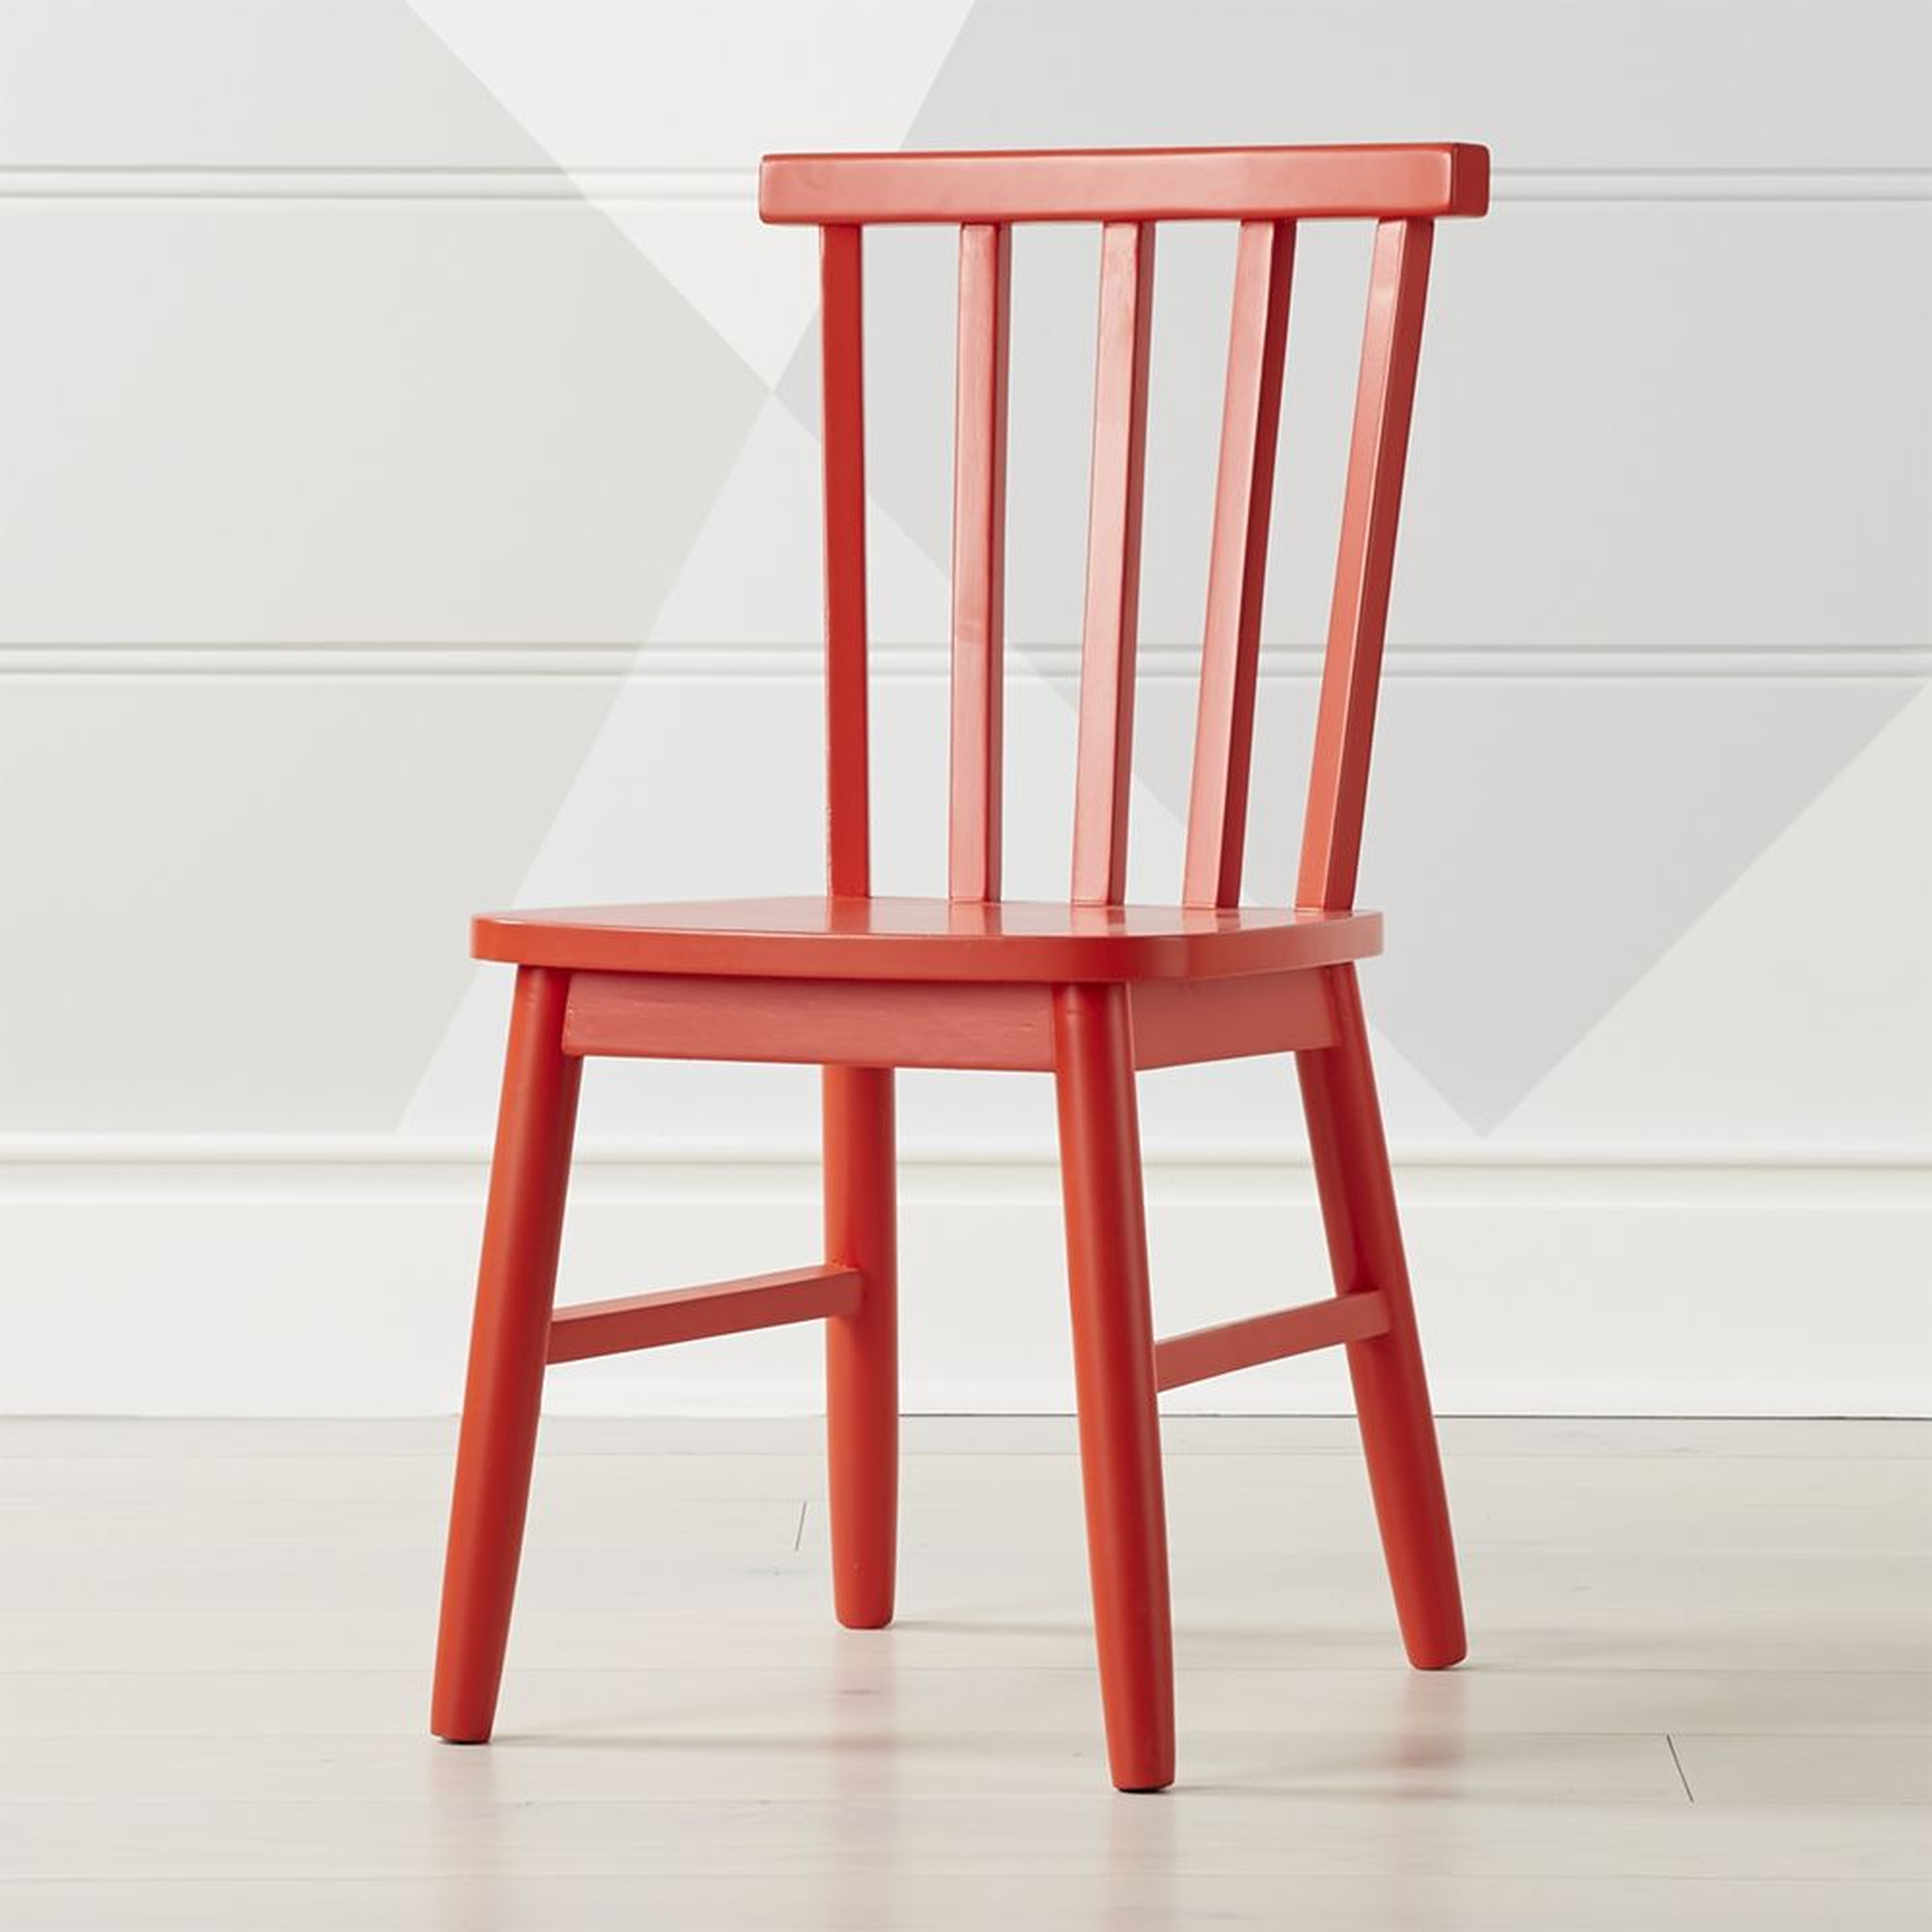 Shore Red Kids Chair - Crate and Barrel